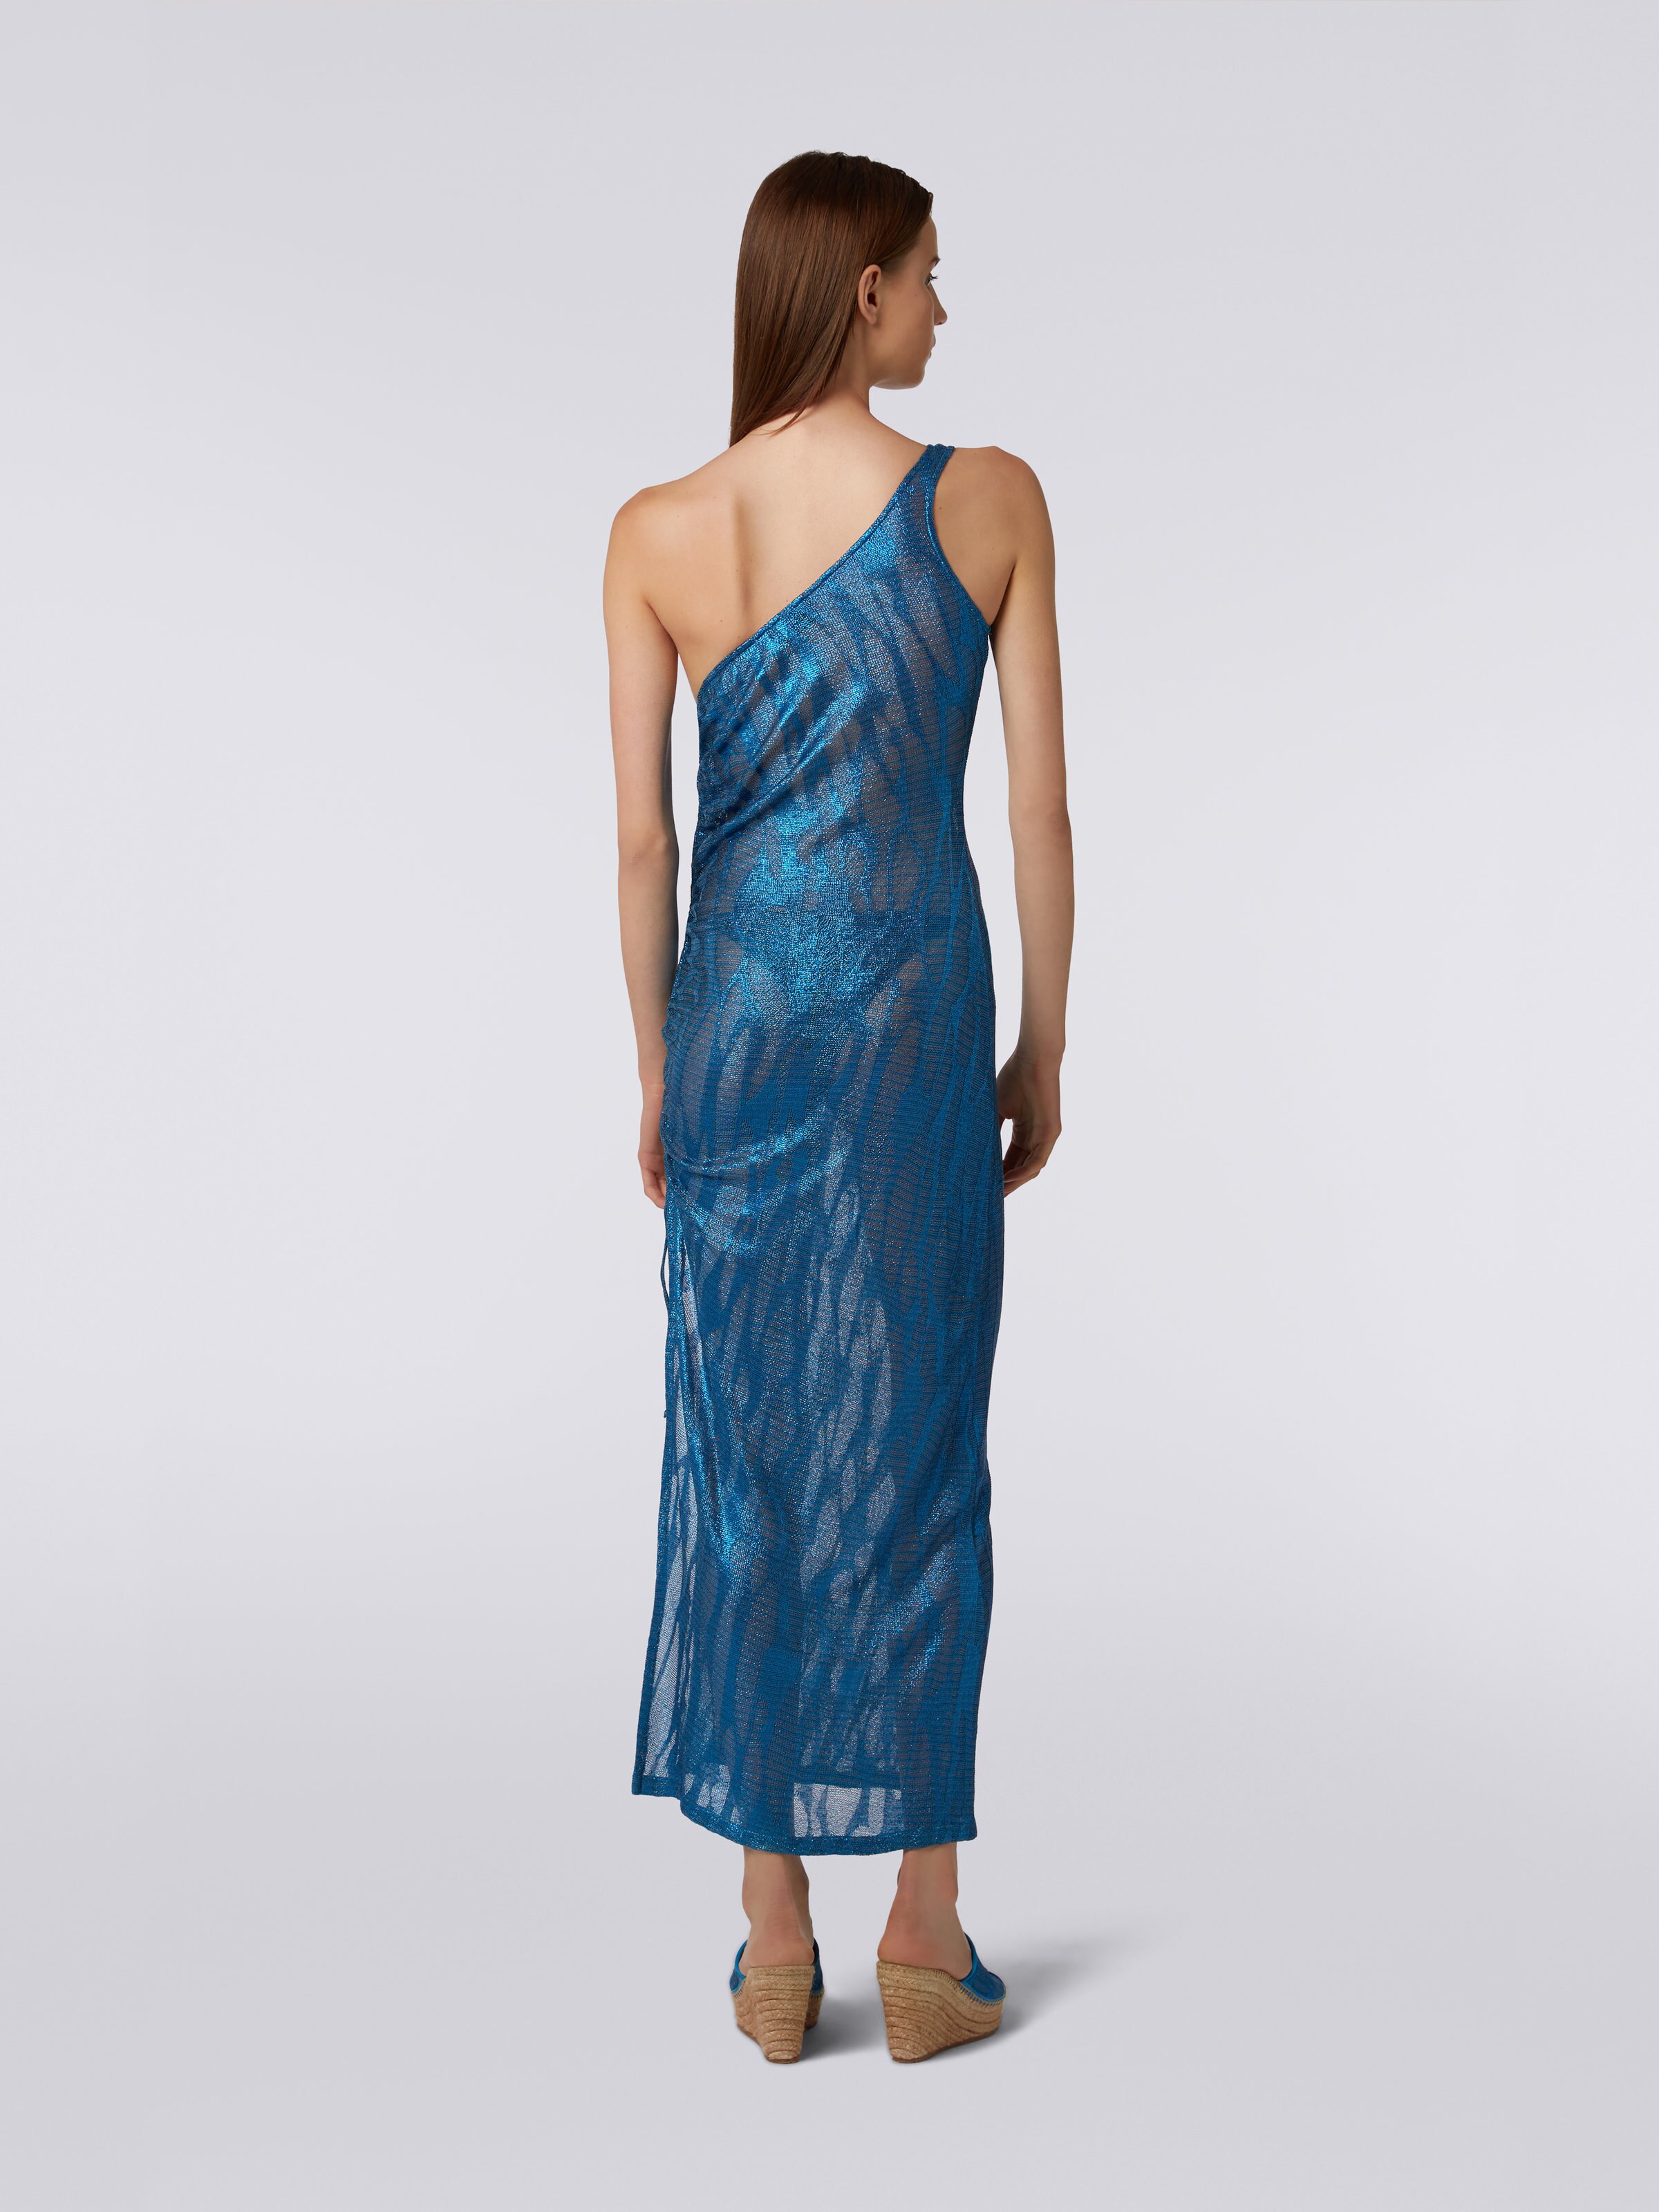 Long one-shoulder cover up in jacquard viscose knit, Blue - 3